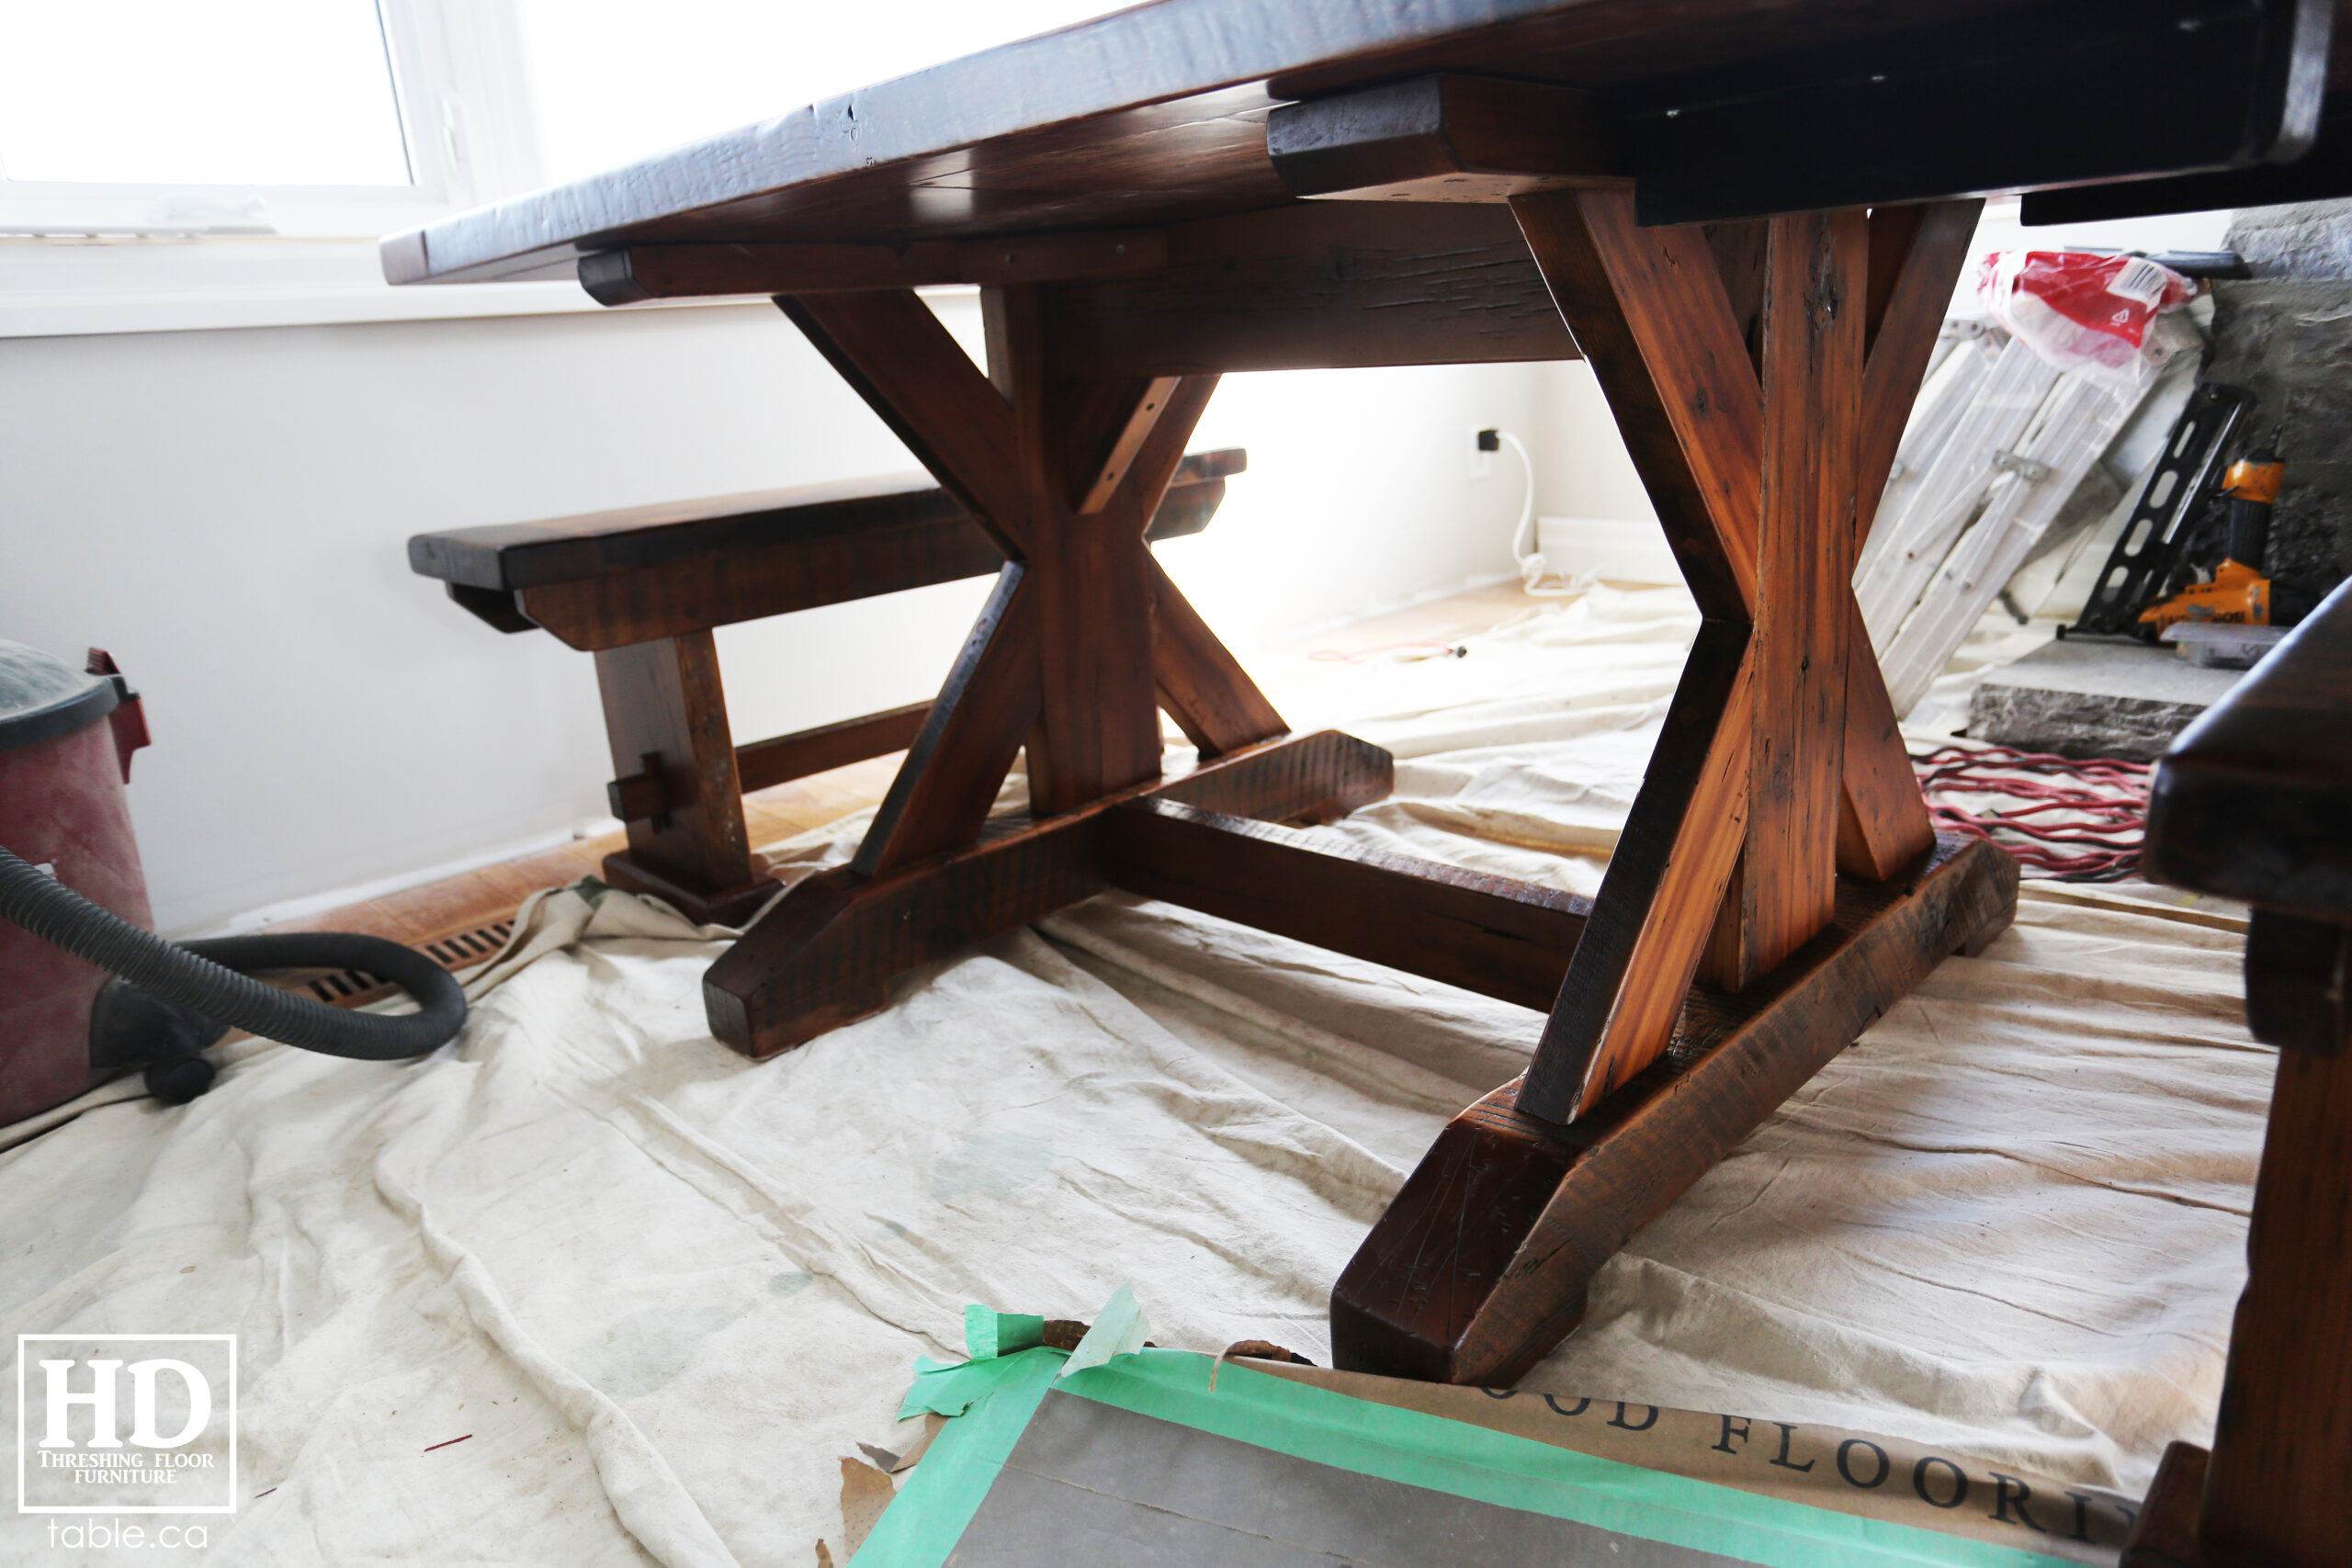 Antique Wood Table by HD Threshing Floor Furniture / www.table.ca